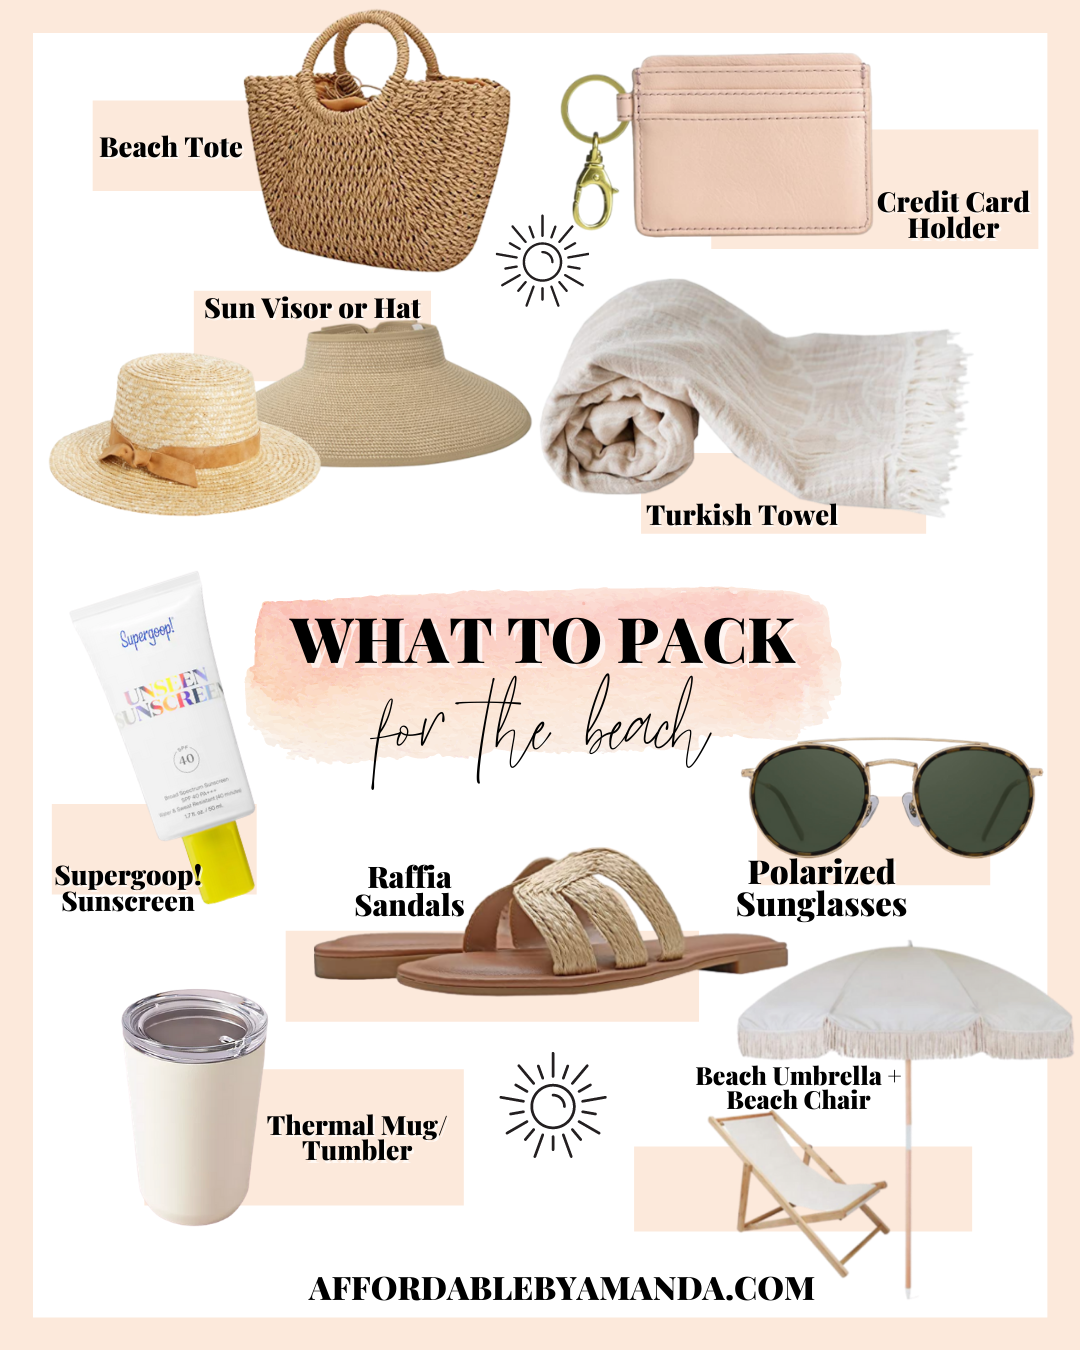 What To Pack for the Beach in 2020 | Best Beach Essentials Packing List 2020